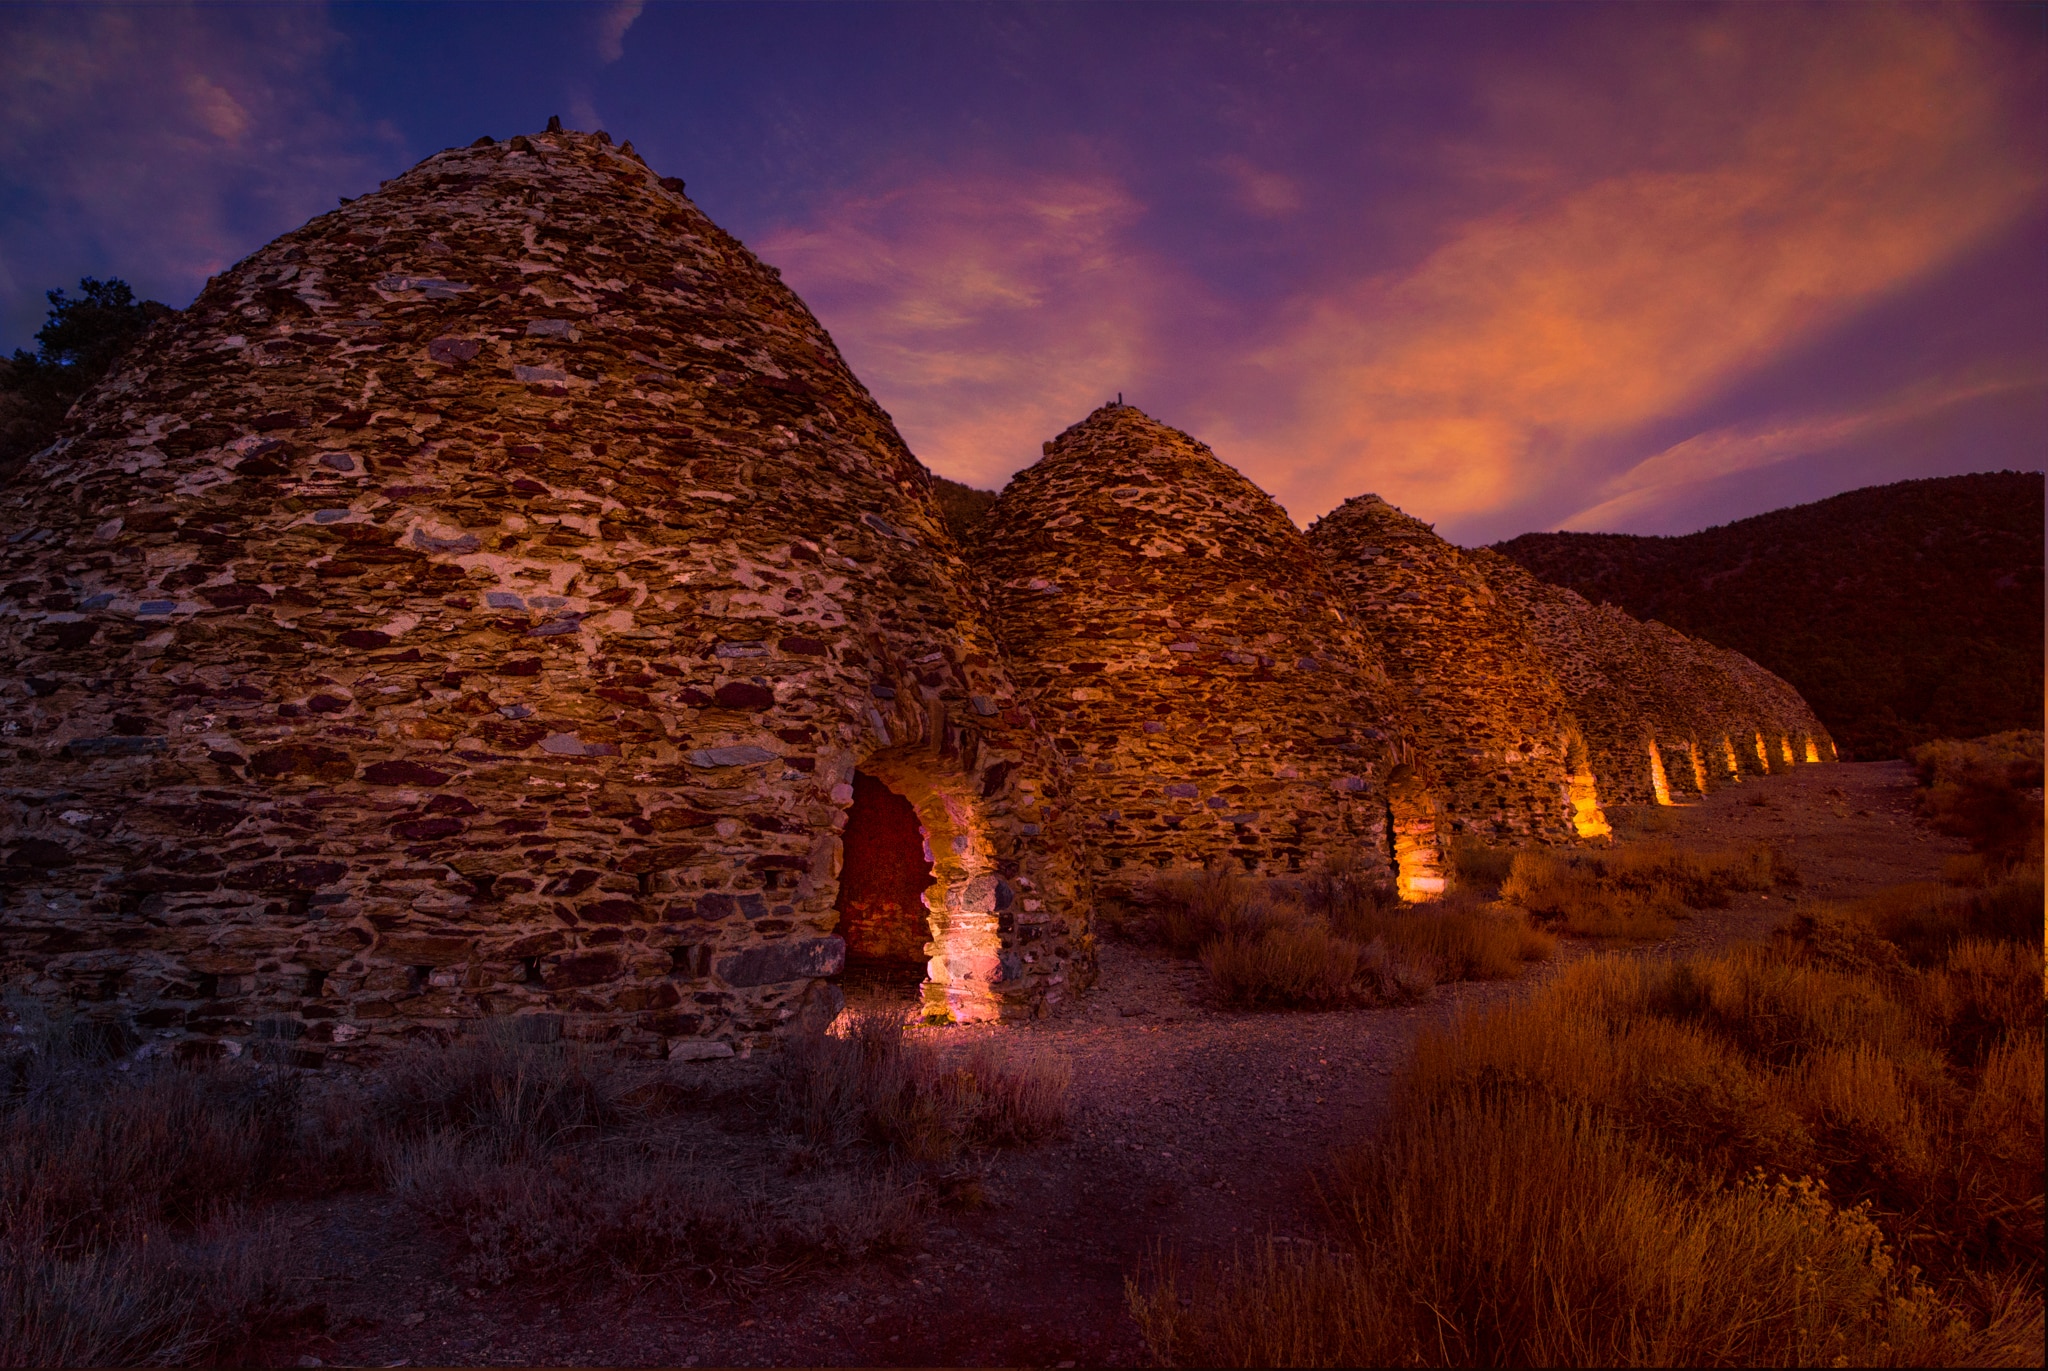 After sunset, lights illuminate the openings of the ten charcoal kilns located at the end of Wildrose Canyon in Death Valley National Park, California.